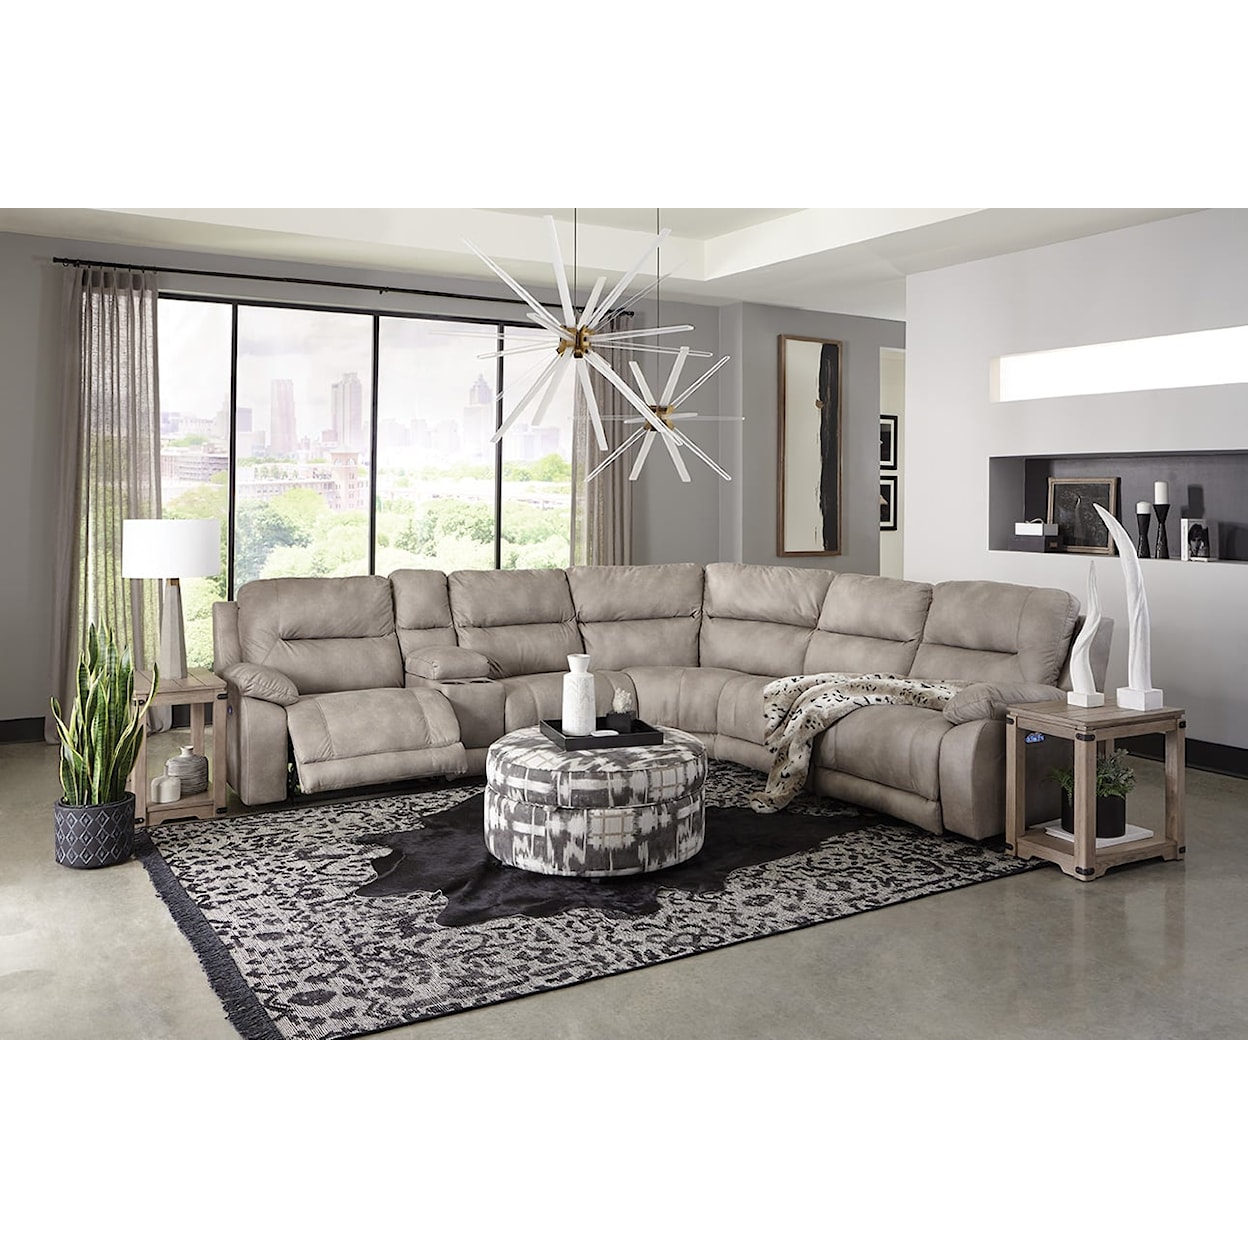 Dimensions EZ9K00/H Series 6-Piece Sectional Sofa with Power Headrest